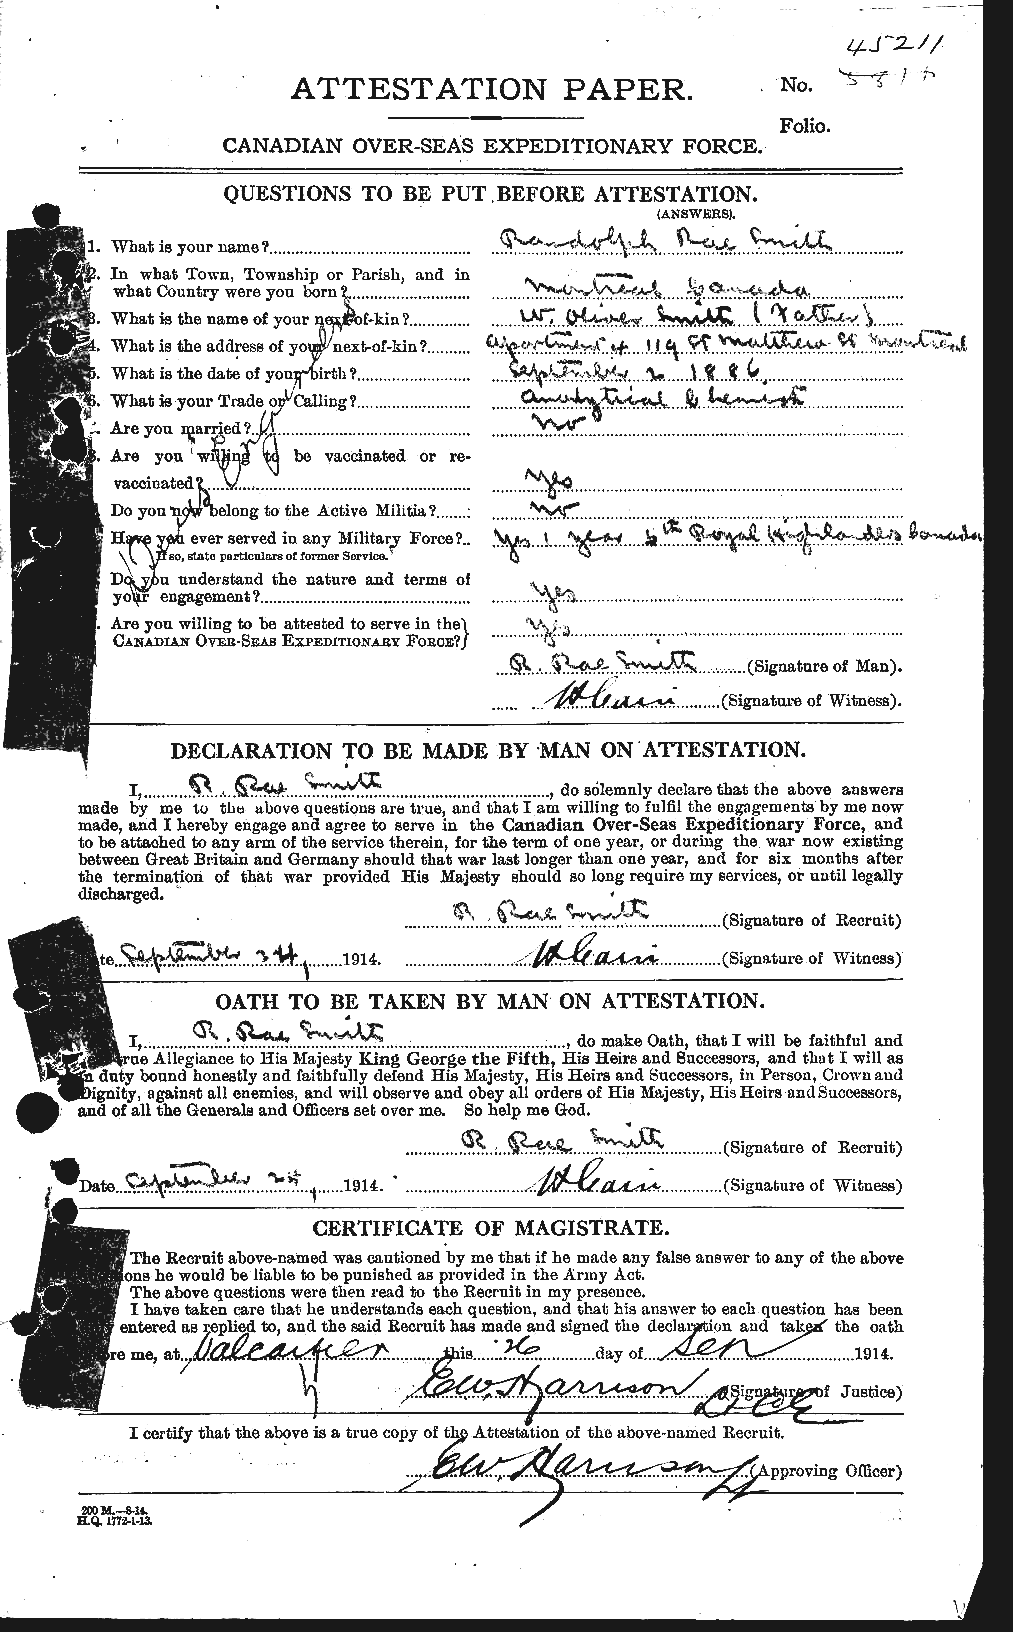 Personnel Records of the First World War - CEF 622239a